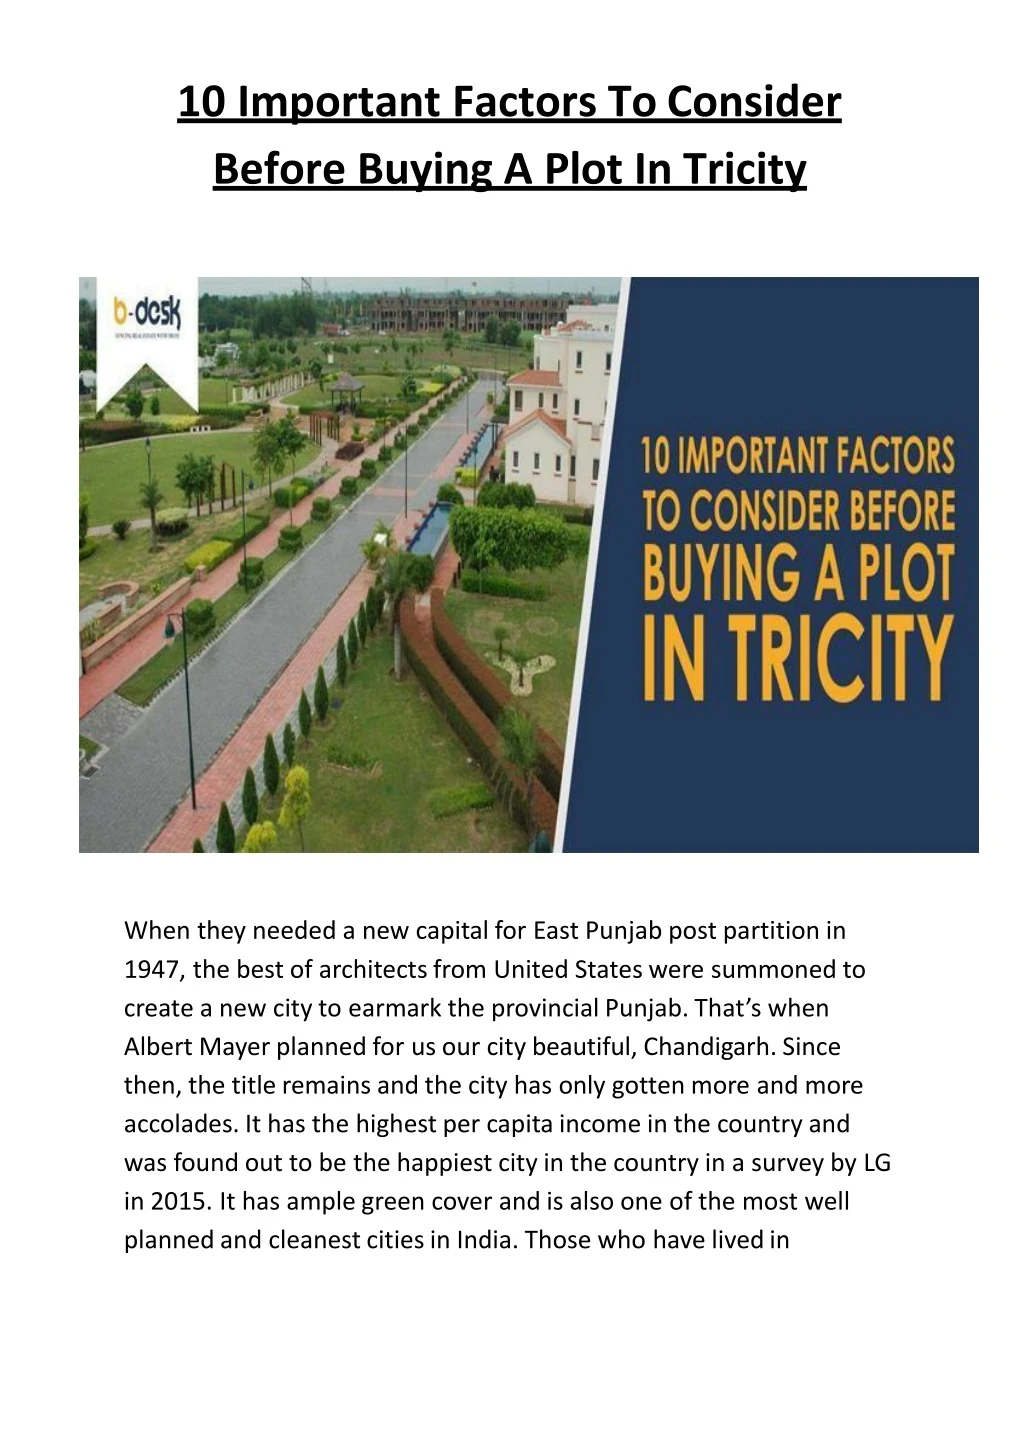 10 important factors to consider before buying a plot in tricity